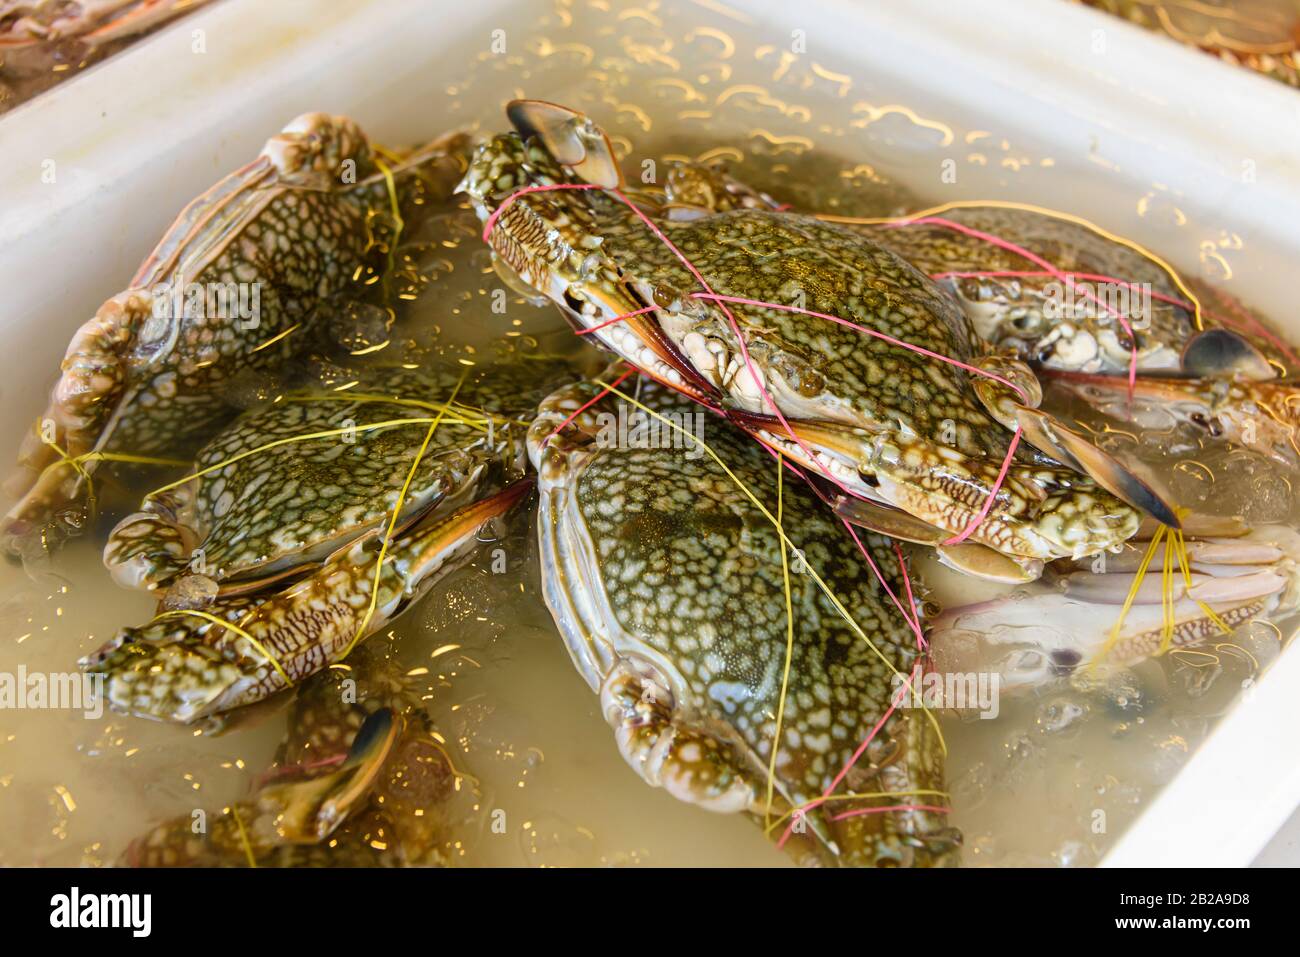 Live crabs trussed up with elastic bands to keep them from moving, at a fishmonger market stall, Phuket, Thailand Stock Photo